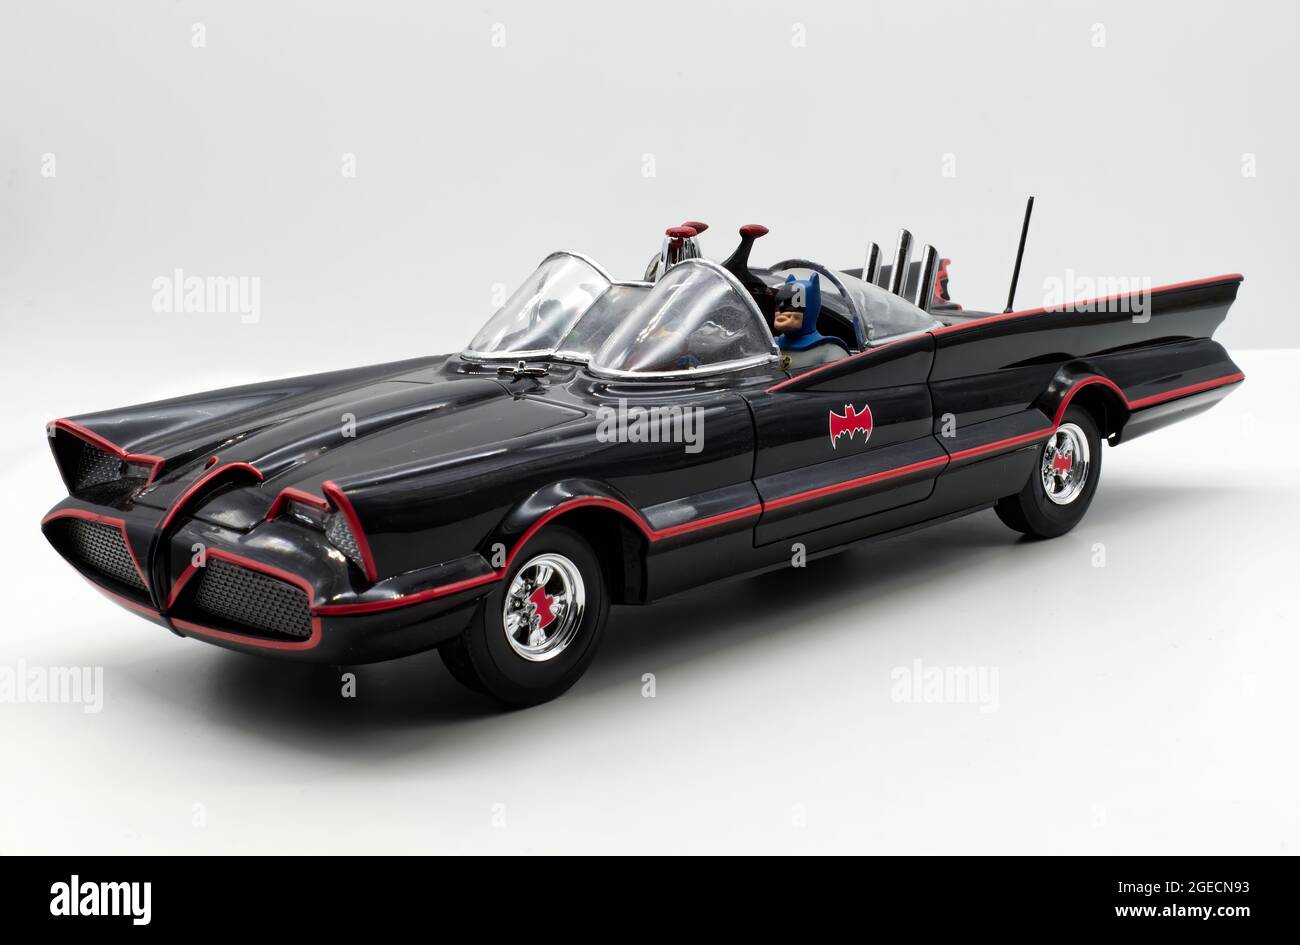 Bologna - Italy - August 19, 2021: Classic Batman action figure inside the Batmobile on white background. Batman from DC comics. Stock Photo